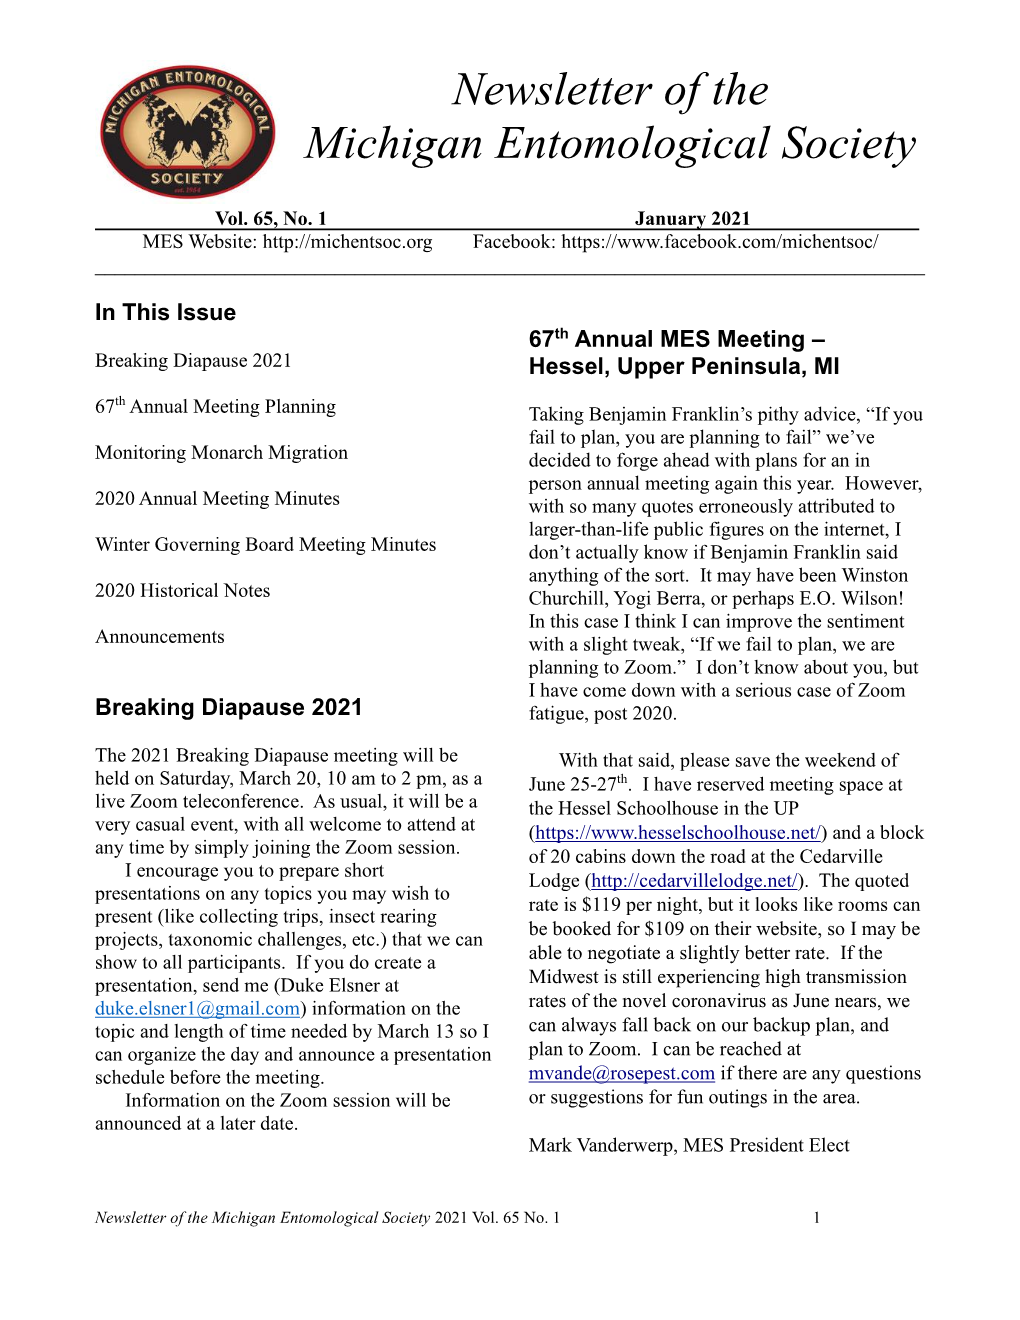 Newsletter of the Michigan Entomological Society 2021 Vol